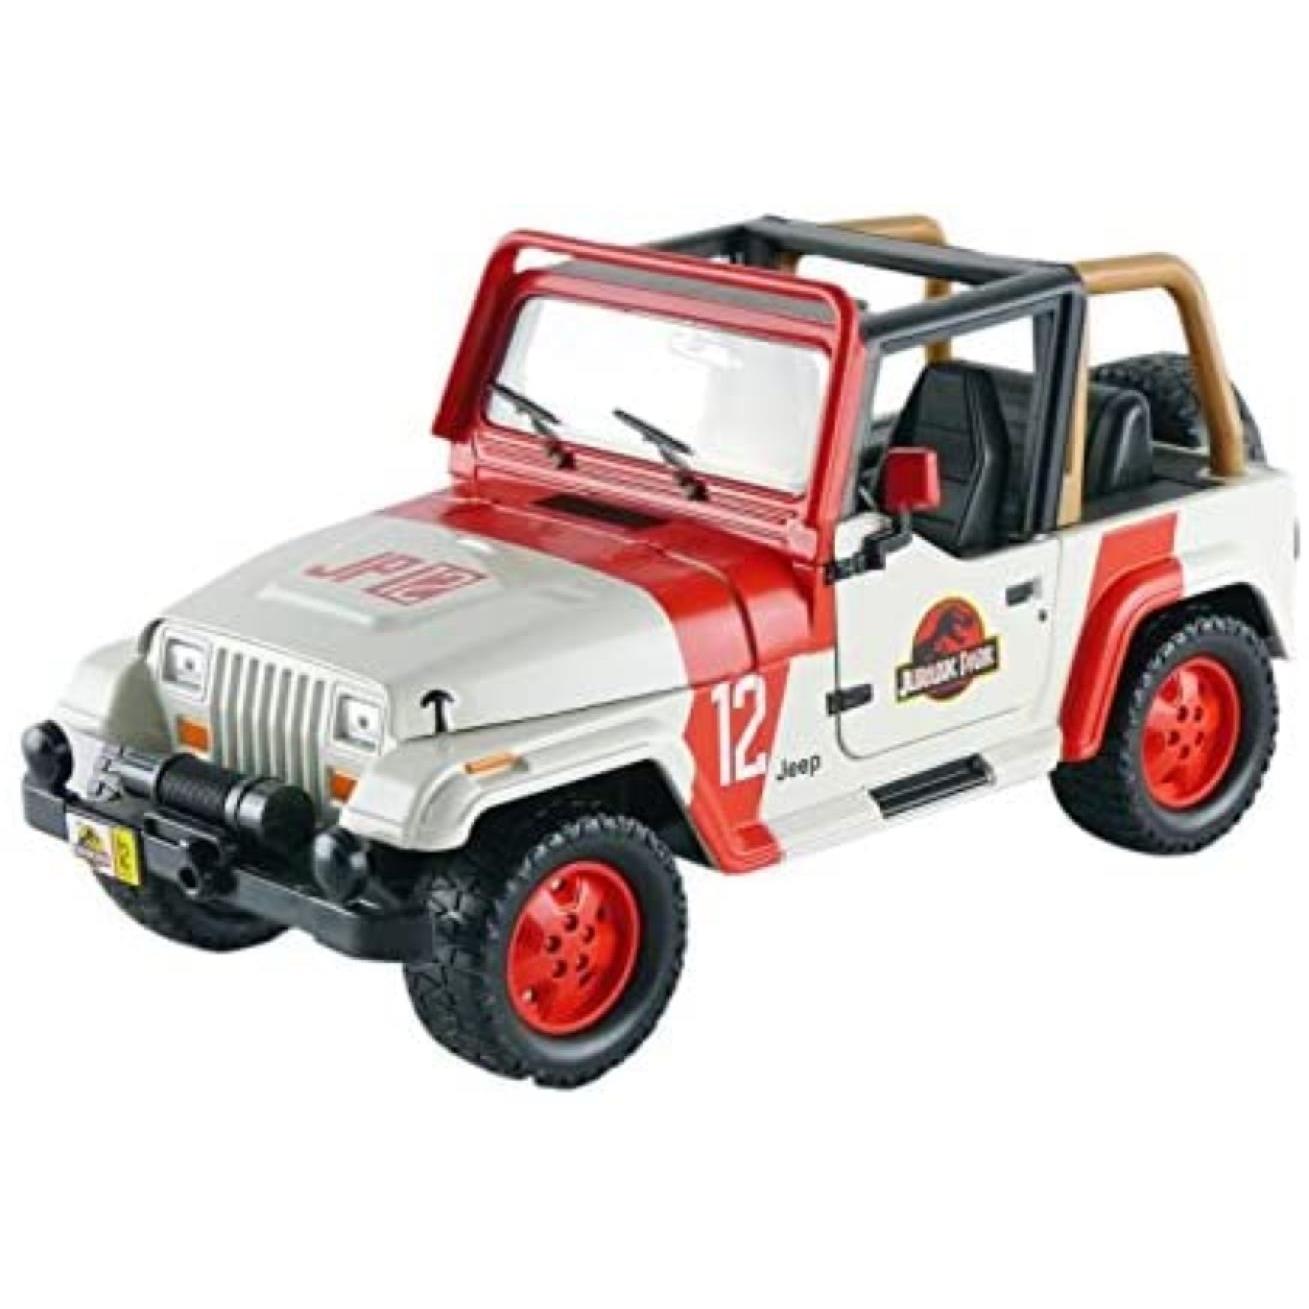 jurassic world - '92 jeep wrangler 1:24 scale hollywood ride vehicle replica